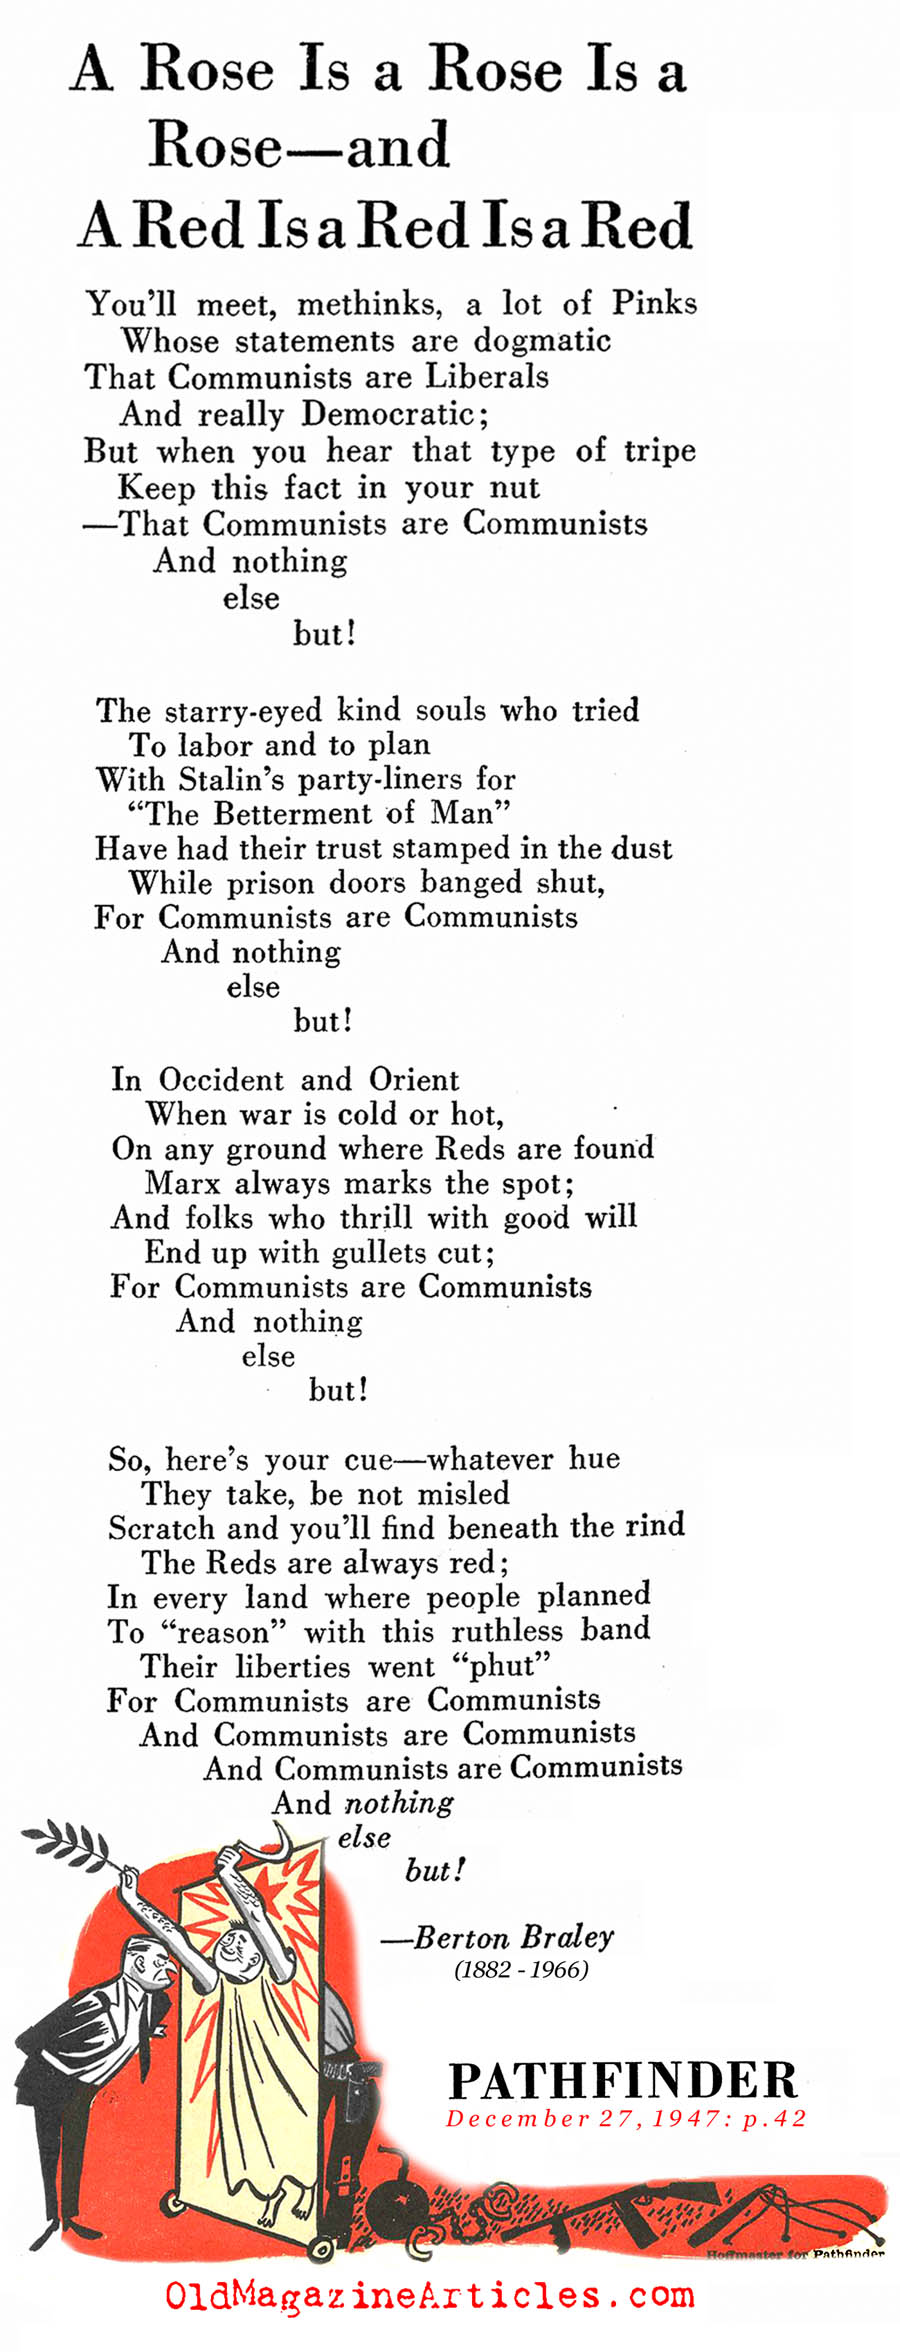 ''A Red Is a Red is a Red'' (Pathfinder Magazine, 1947)